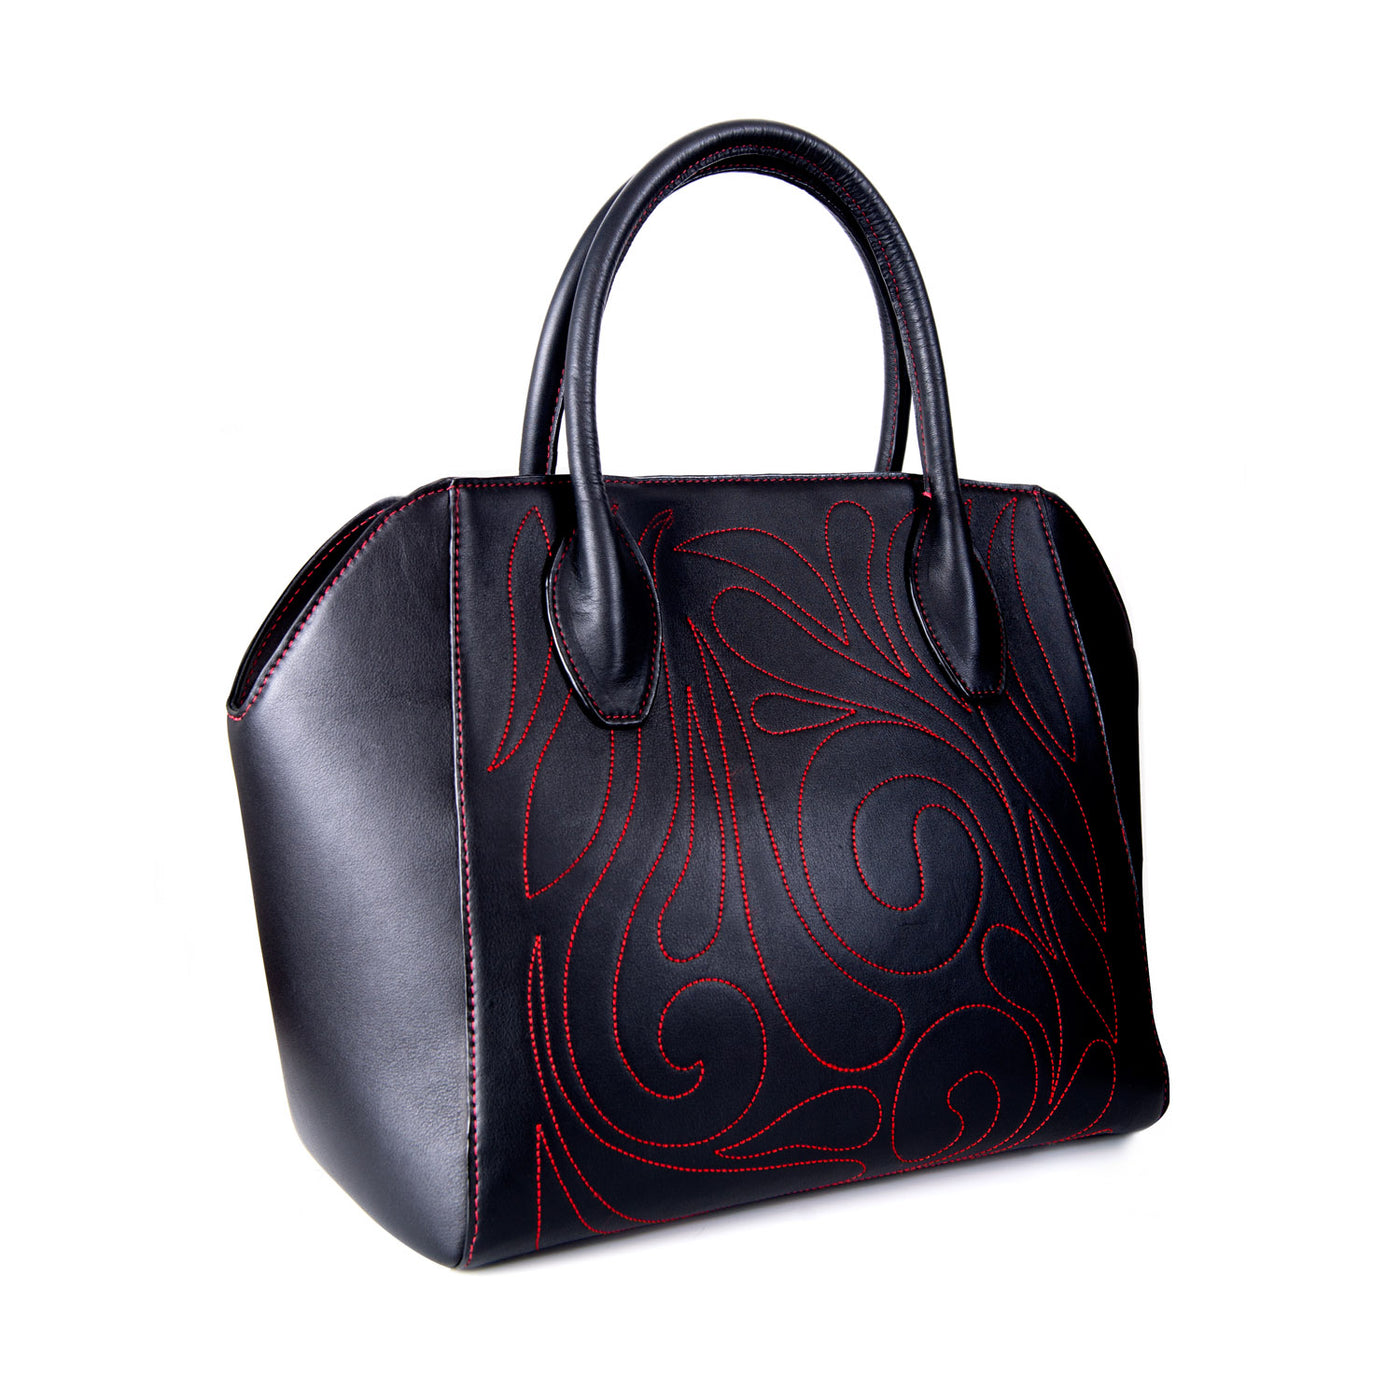 Lily Ruby Tote - Women's tote bag for everyday use